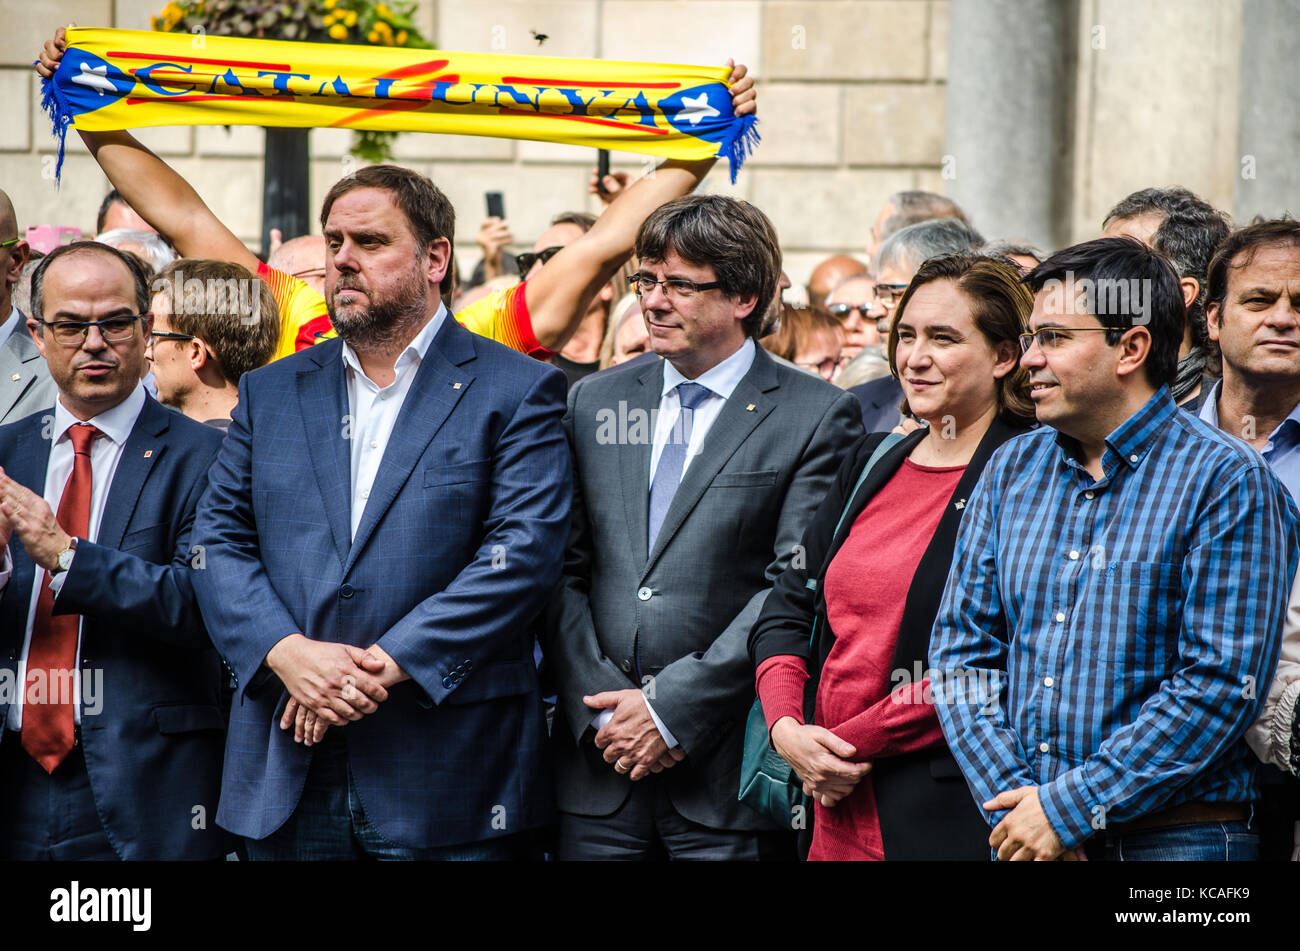 Barcelona, Spain. 3rd Oct, 2017. The Government of the Generalitat are seen during the minute of silence, while a man raising in the air a Catalonia scarf. The Catalan Government and the city of Barcelona gathered for a minute of silence as a sign of rejection against Police brutality, in the San Jauma Plaza, headquarters of both administrations. Stock Photo